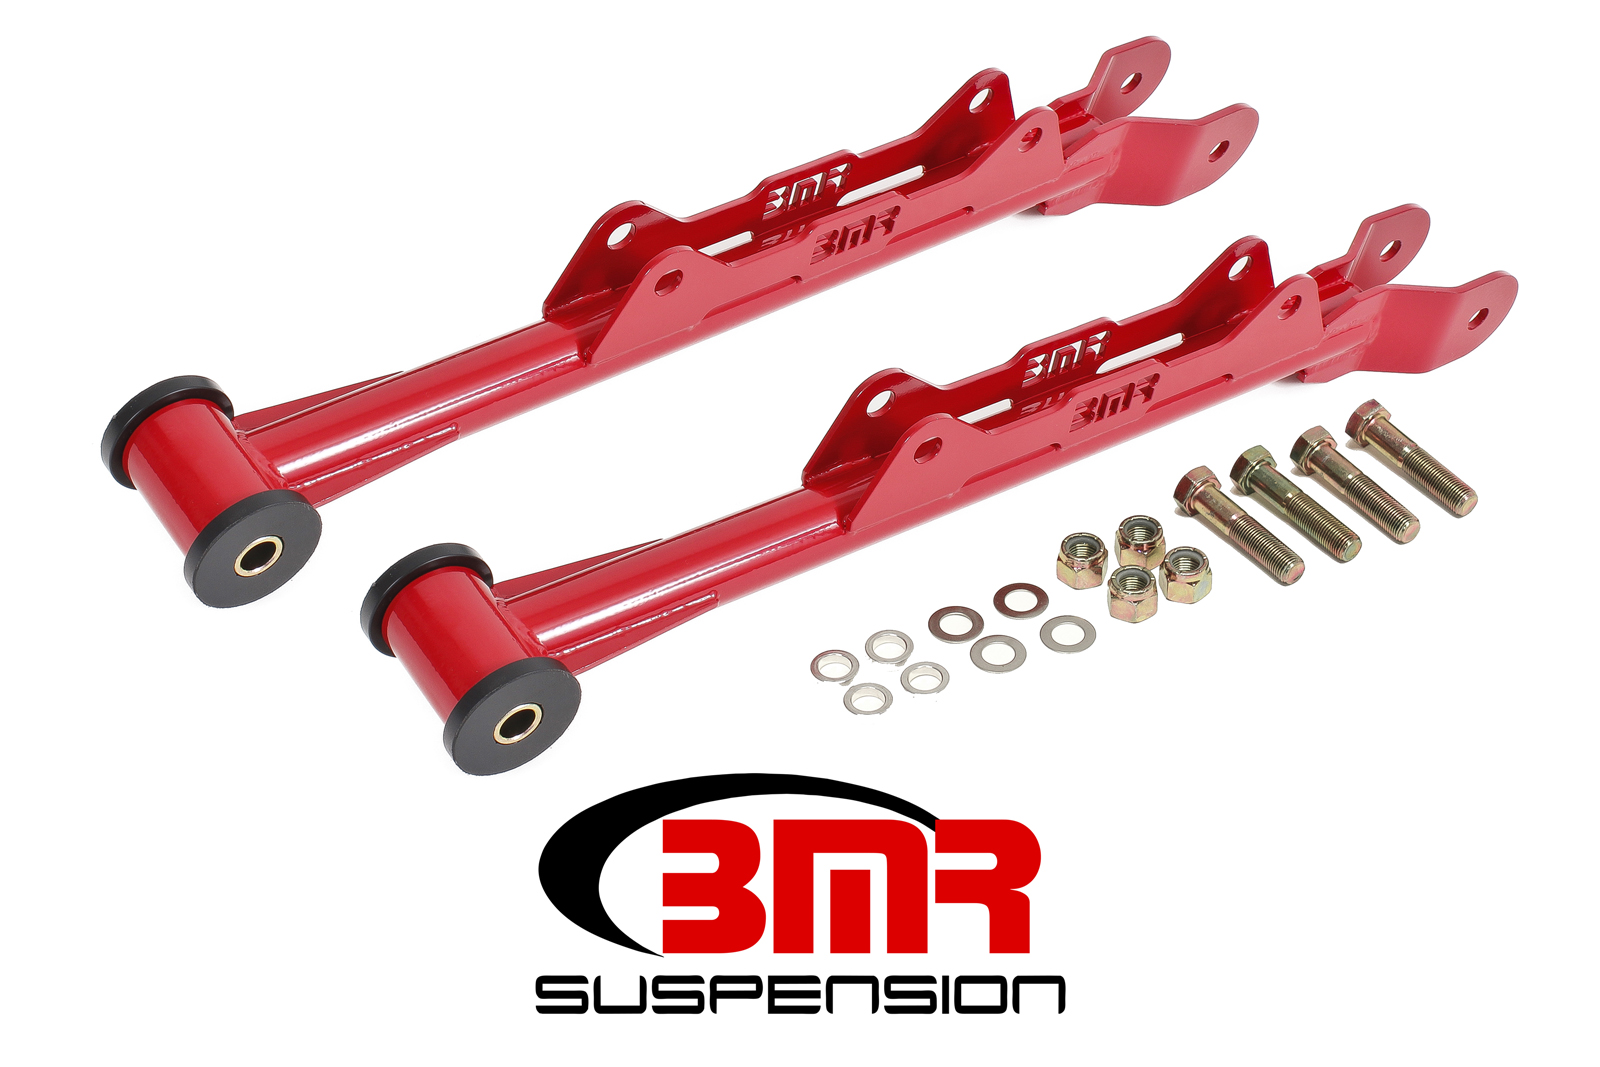 Lower Control Arms, Rear, Chrome-moly, Non-Adjustable, Delrin, Fits all 2010-2015 Chevrolet Camaros, BMR Suspension - MTCA030R